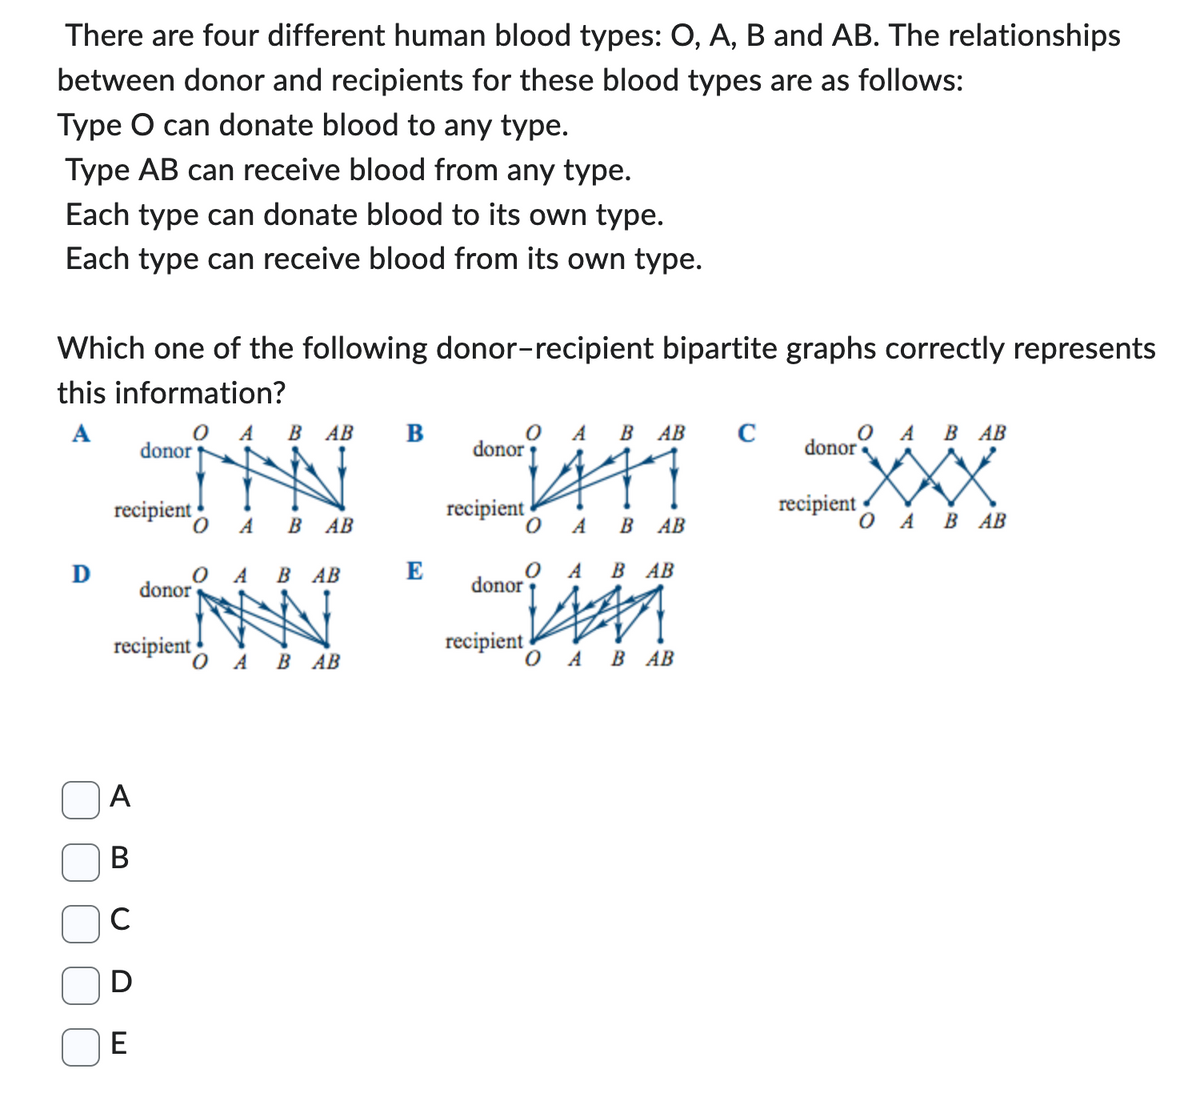 There are four different human blood types: O, A, B and AB. The relationships
between donor and recipients for these blood types are as follows:
Type O can donate blood to any type.
Type AB can receive blood from any type.
Each type can donate blood to its own type.
Each type can receive blood from its own type.
Which one of the following donor-recipient bipartite graphs correctly represents
this information?
A
O A B AB
D
recipient
donor
A
B
C
E
OAB AB
OAB AB
recipient
donor
O A BAB
B
E
B
donor
311
recipient
OAB AB
0 A
B AB
VAA
OAB AB
donor
AB
recipient
C
donor
recipient
A B AB
A BAB